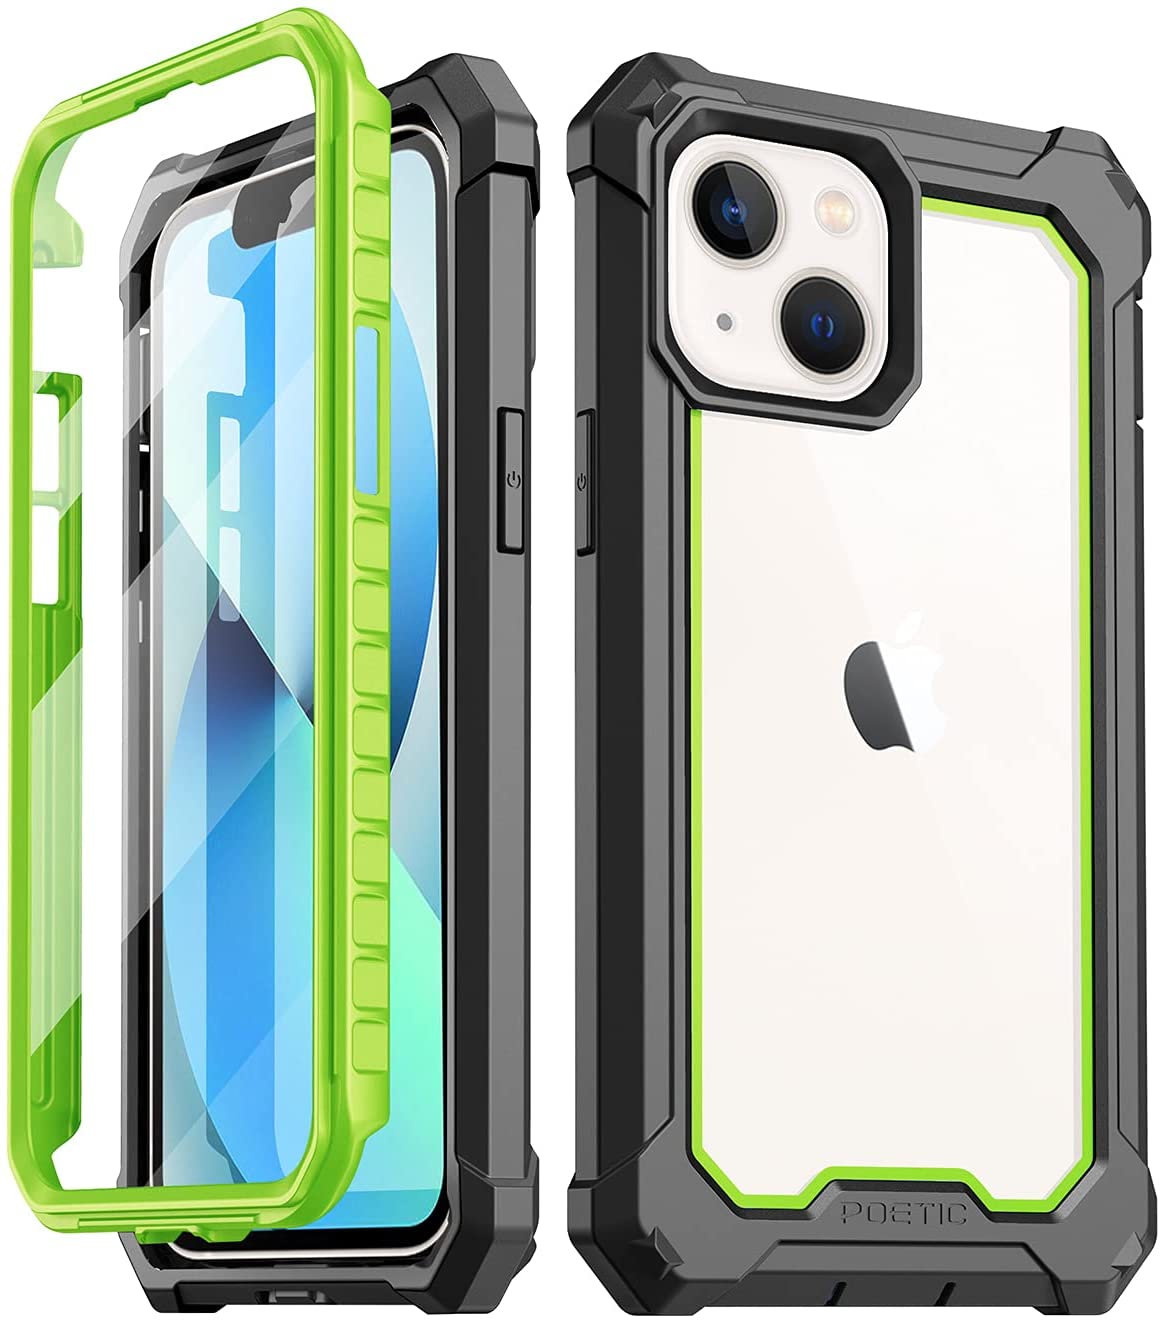 Poetic Neon Series Case Designed for iPhone 13 Mini, Dual Layer Heavy Duty Tough Rugged Lightweight Slim Shockproof Protective Case 2021 New Cover